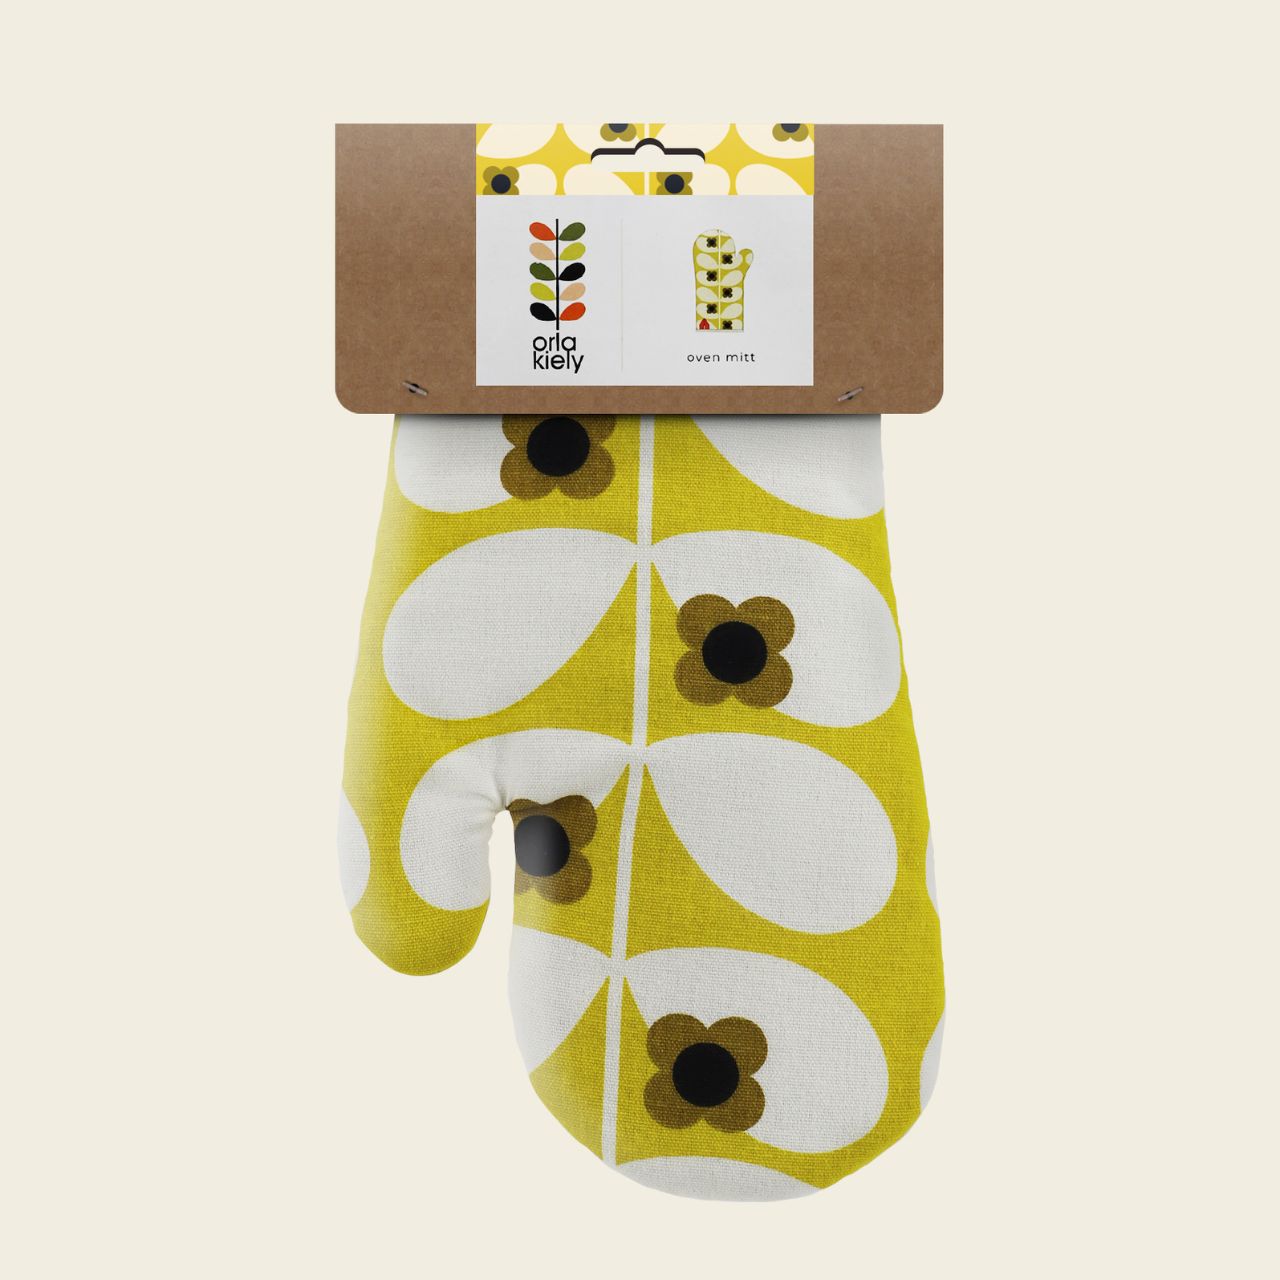 Tipperary Orla Kiely Oven Mitt - Wild Rose Stem Ochre  An Orla Kiely oven gauntlet with a beautiful Wild Rose Stem design in bright dandelion. Keep your hand safe from burns and scalds in the kitchen with the beautiful stem print oven glove from Orla Kiely.